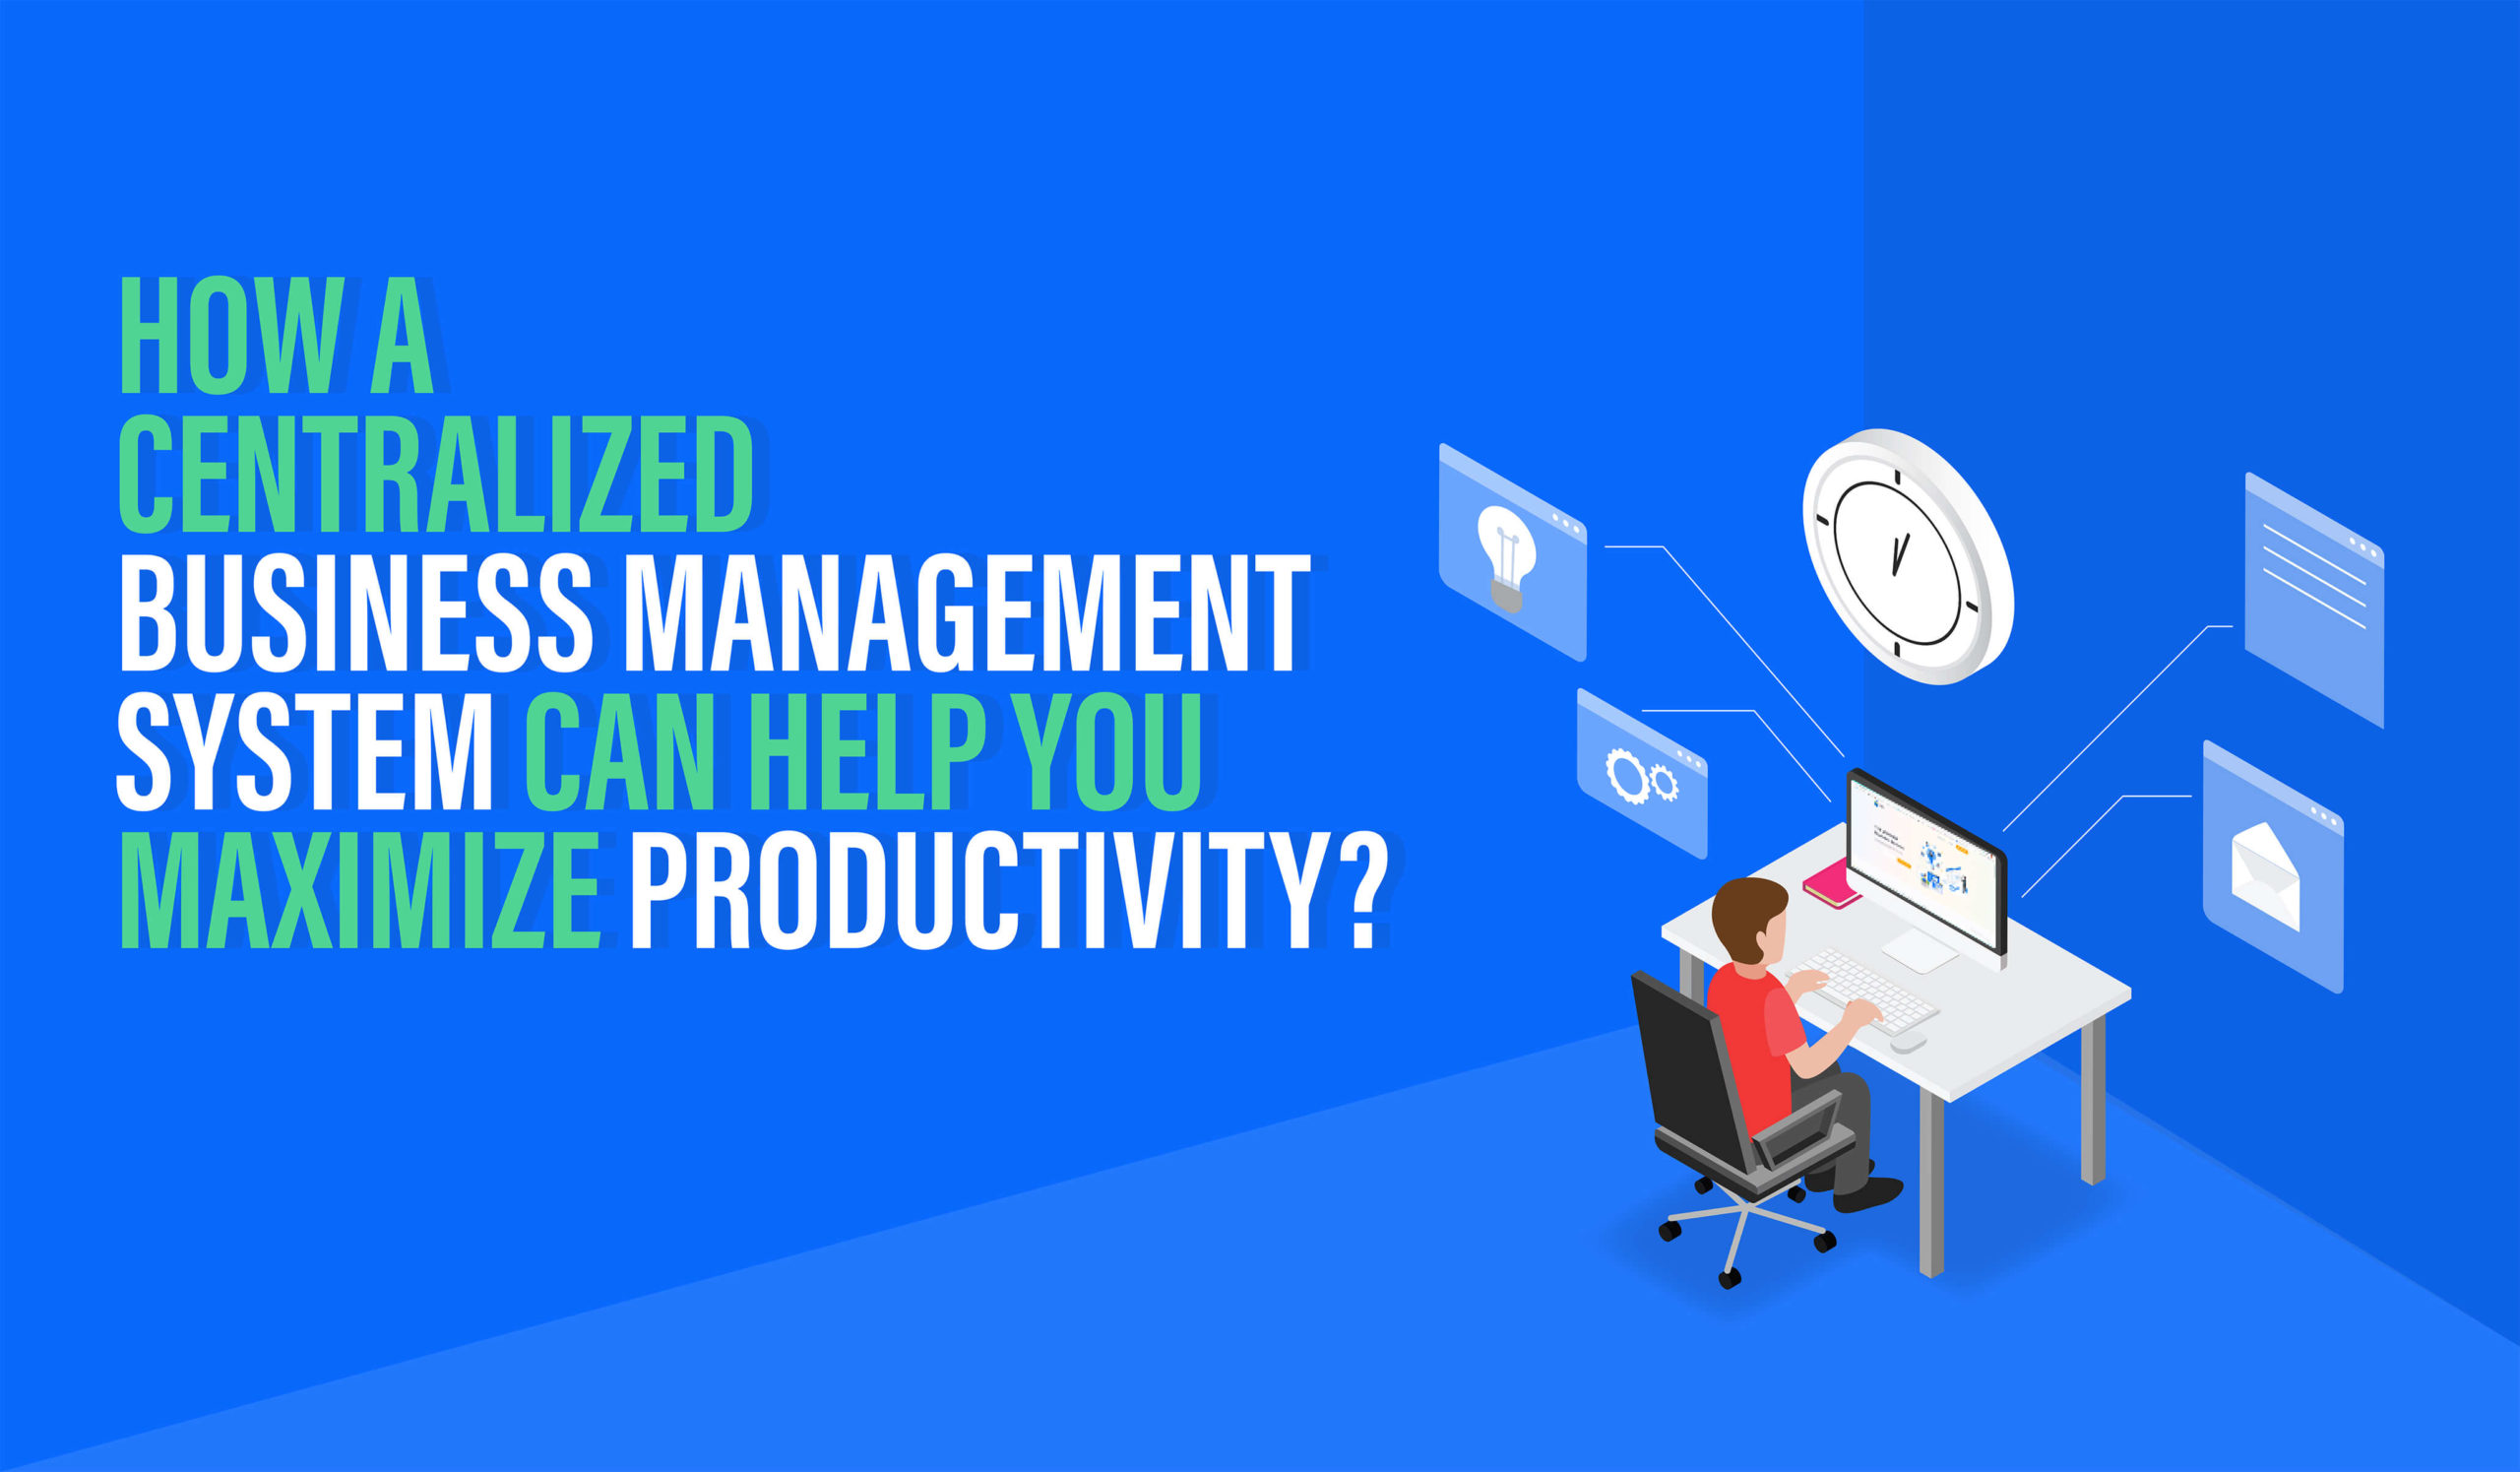 Howa a centralized business management system can help you maximize productivity scaled